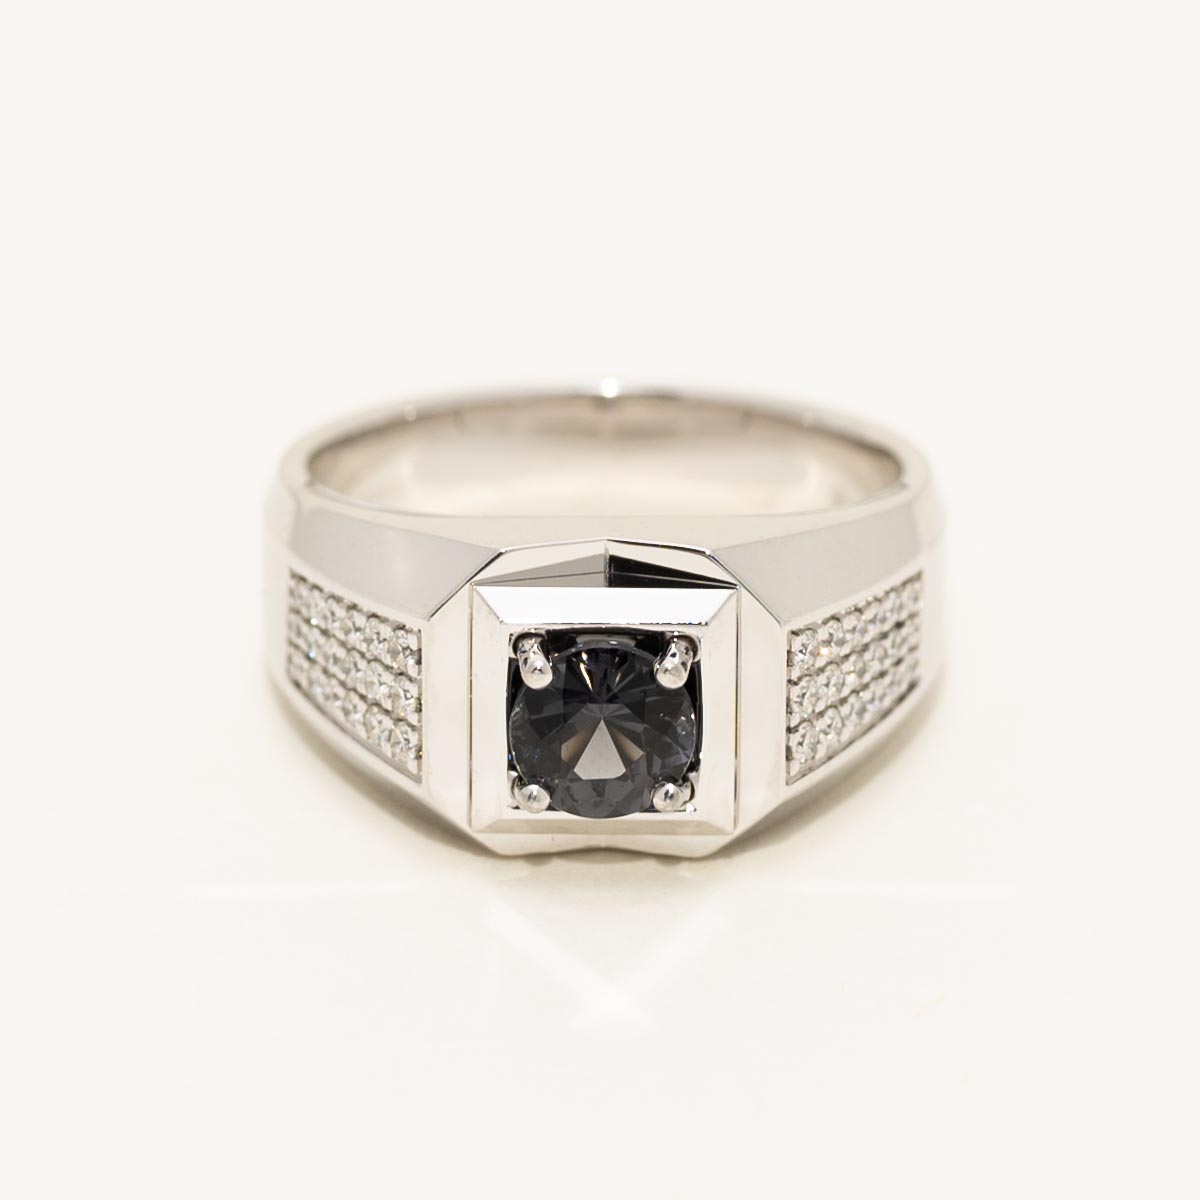 Gray Spinel Mens Ring in 18kt White Gold with Diamonds (1/4t tw)